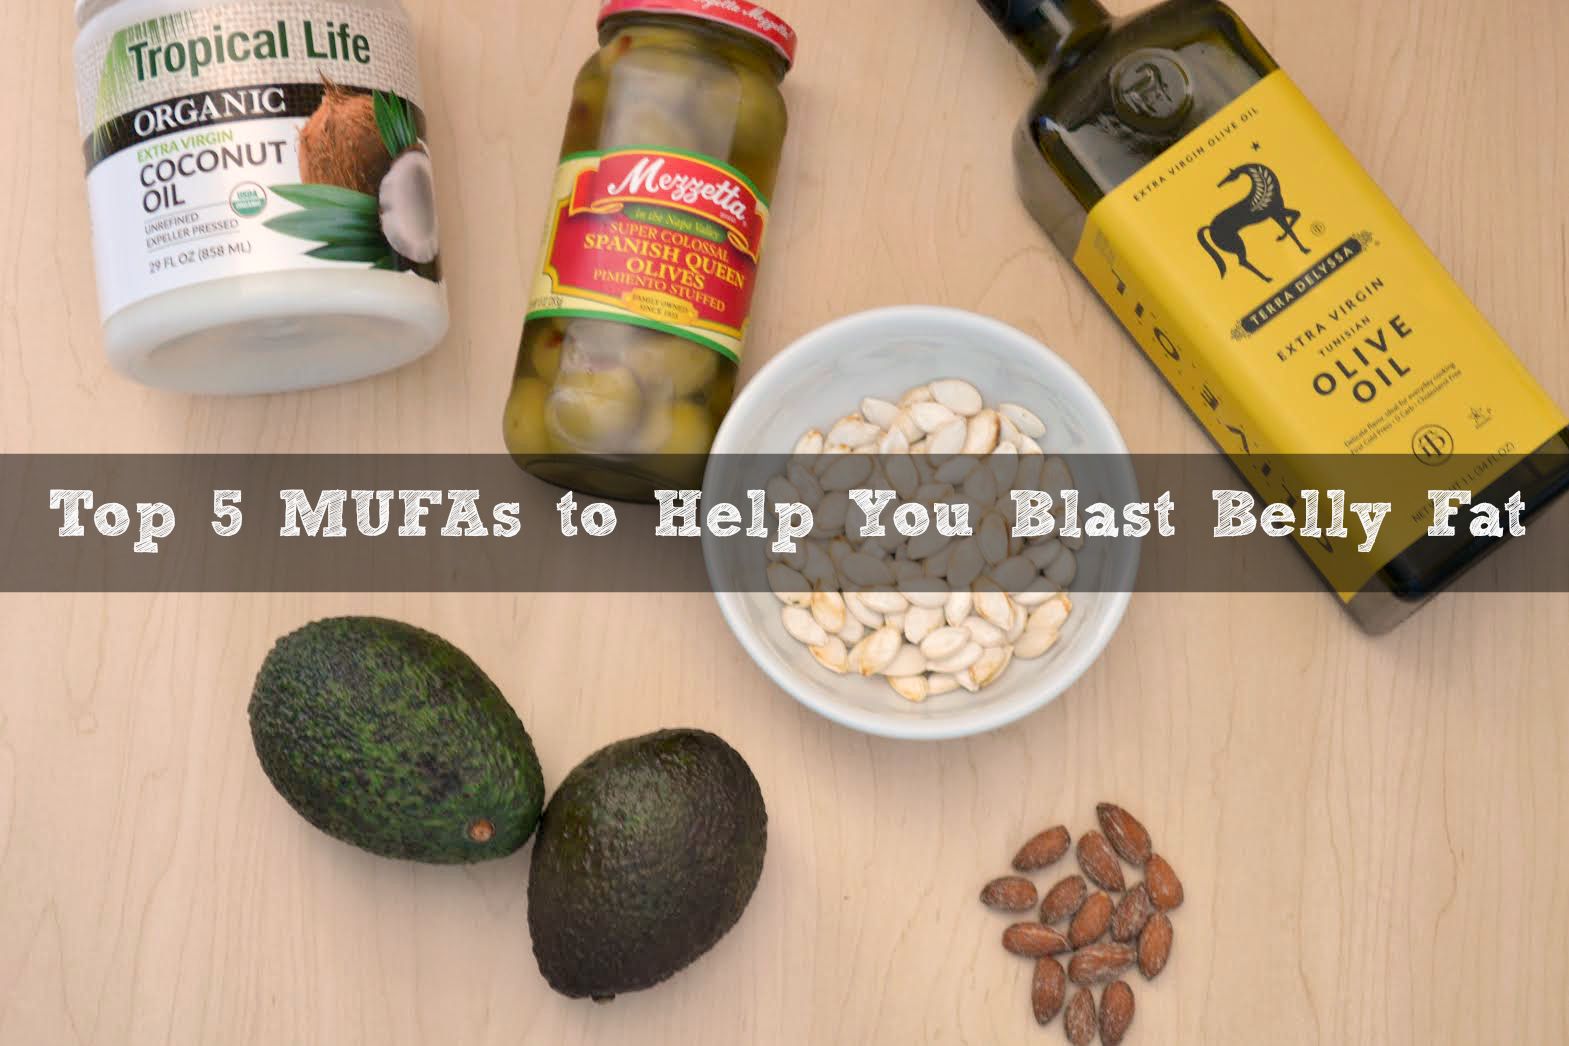 Top 4 MUFAs to help lose belly fat